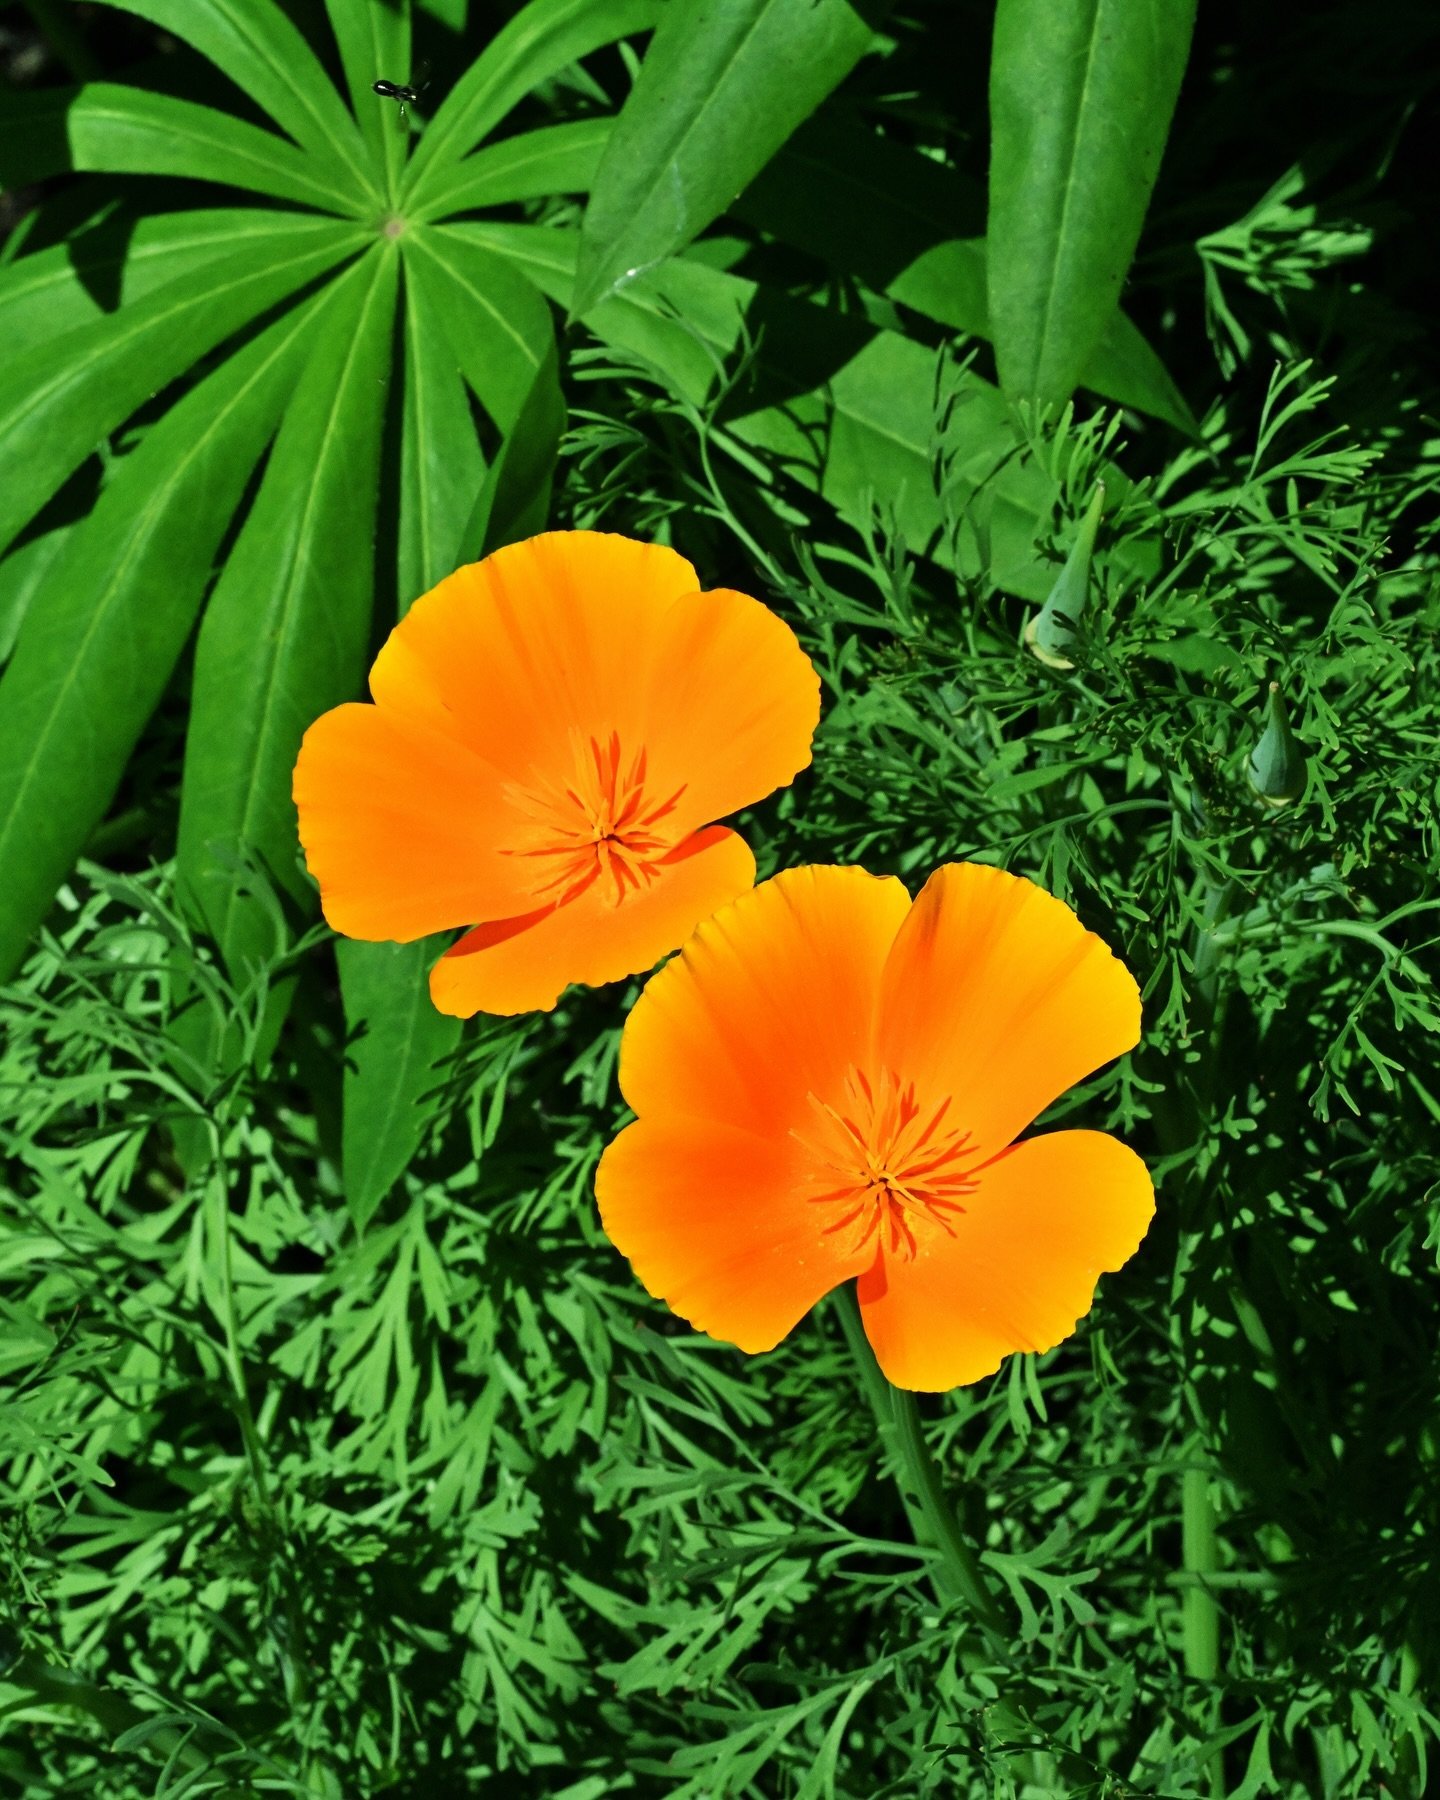 Eschscholzia californica basking in yesterday's sunshine. 

I have a long-term love affair going on with poppies, and the California poppy in particular fills me with joy and gratitude - gratitude for being fortunate enough to have spent decades livi